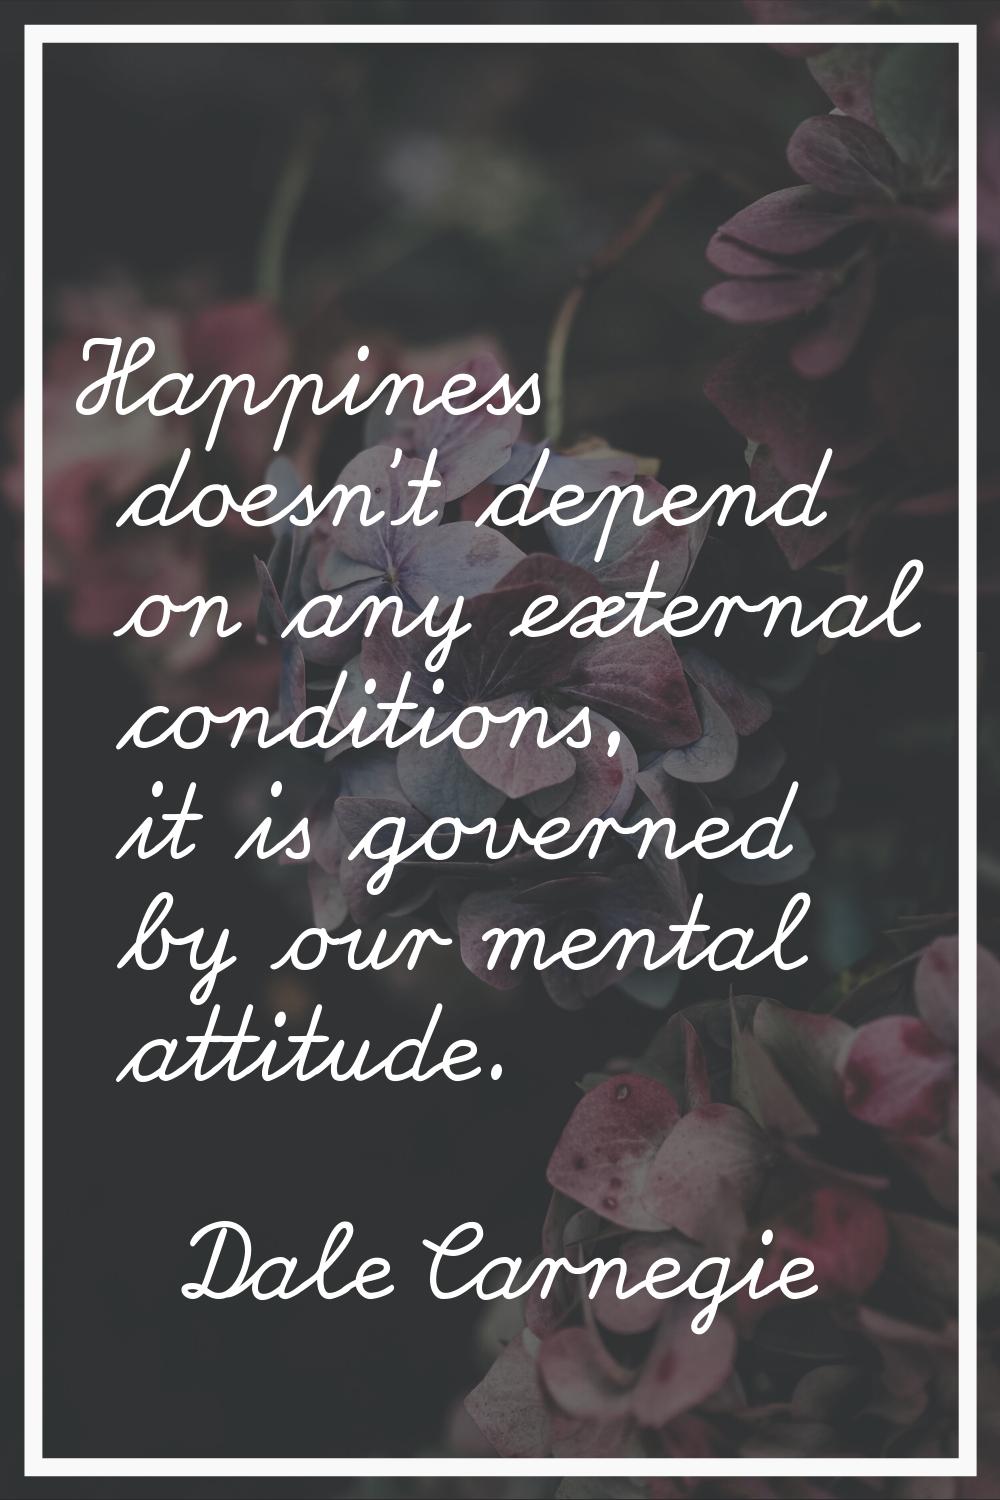 Happiness doesn't depend on any external conditions, it is governed by our mental attitude.